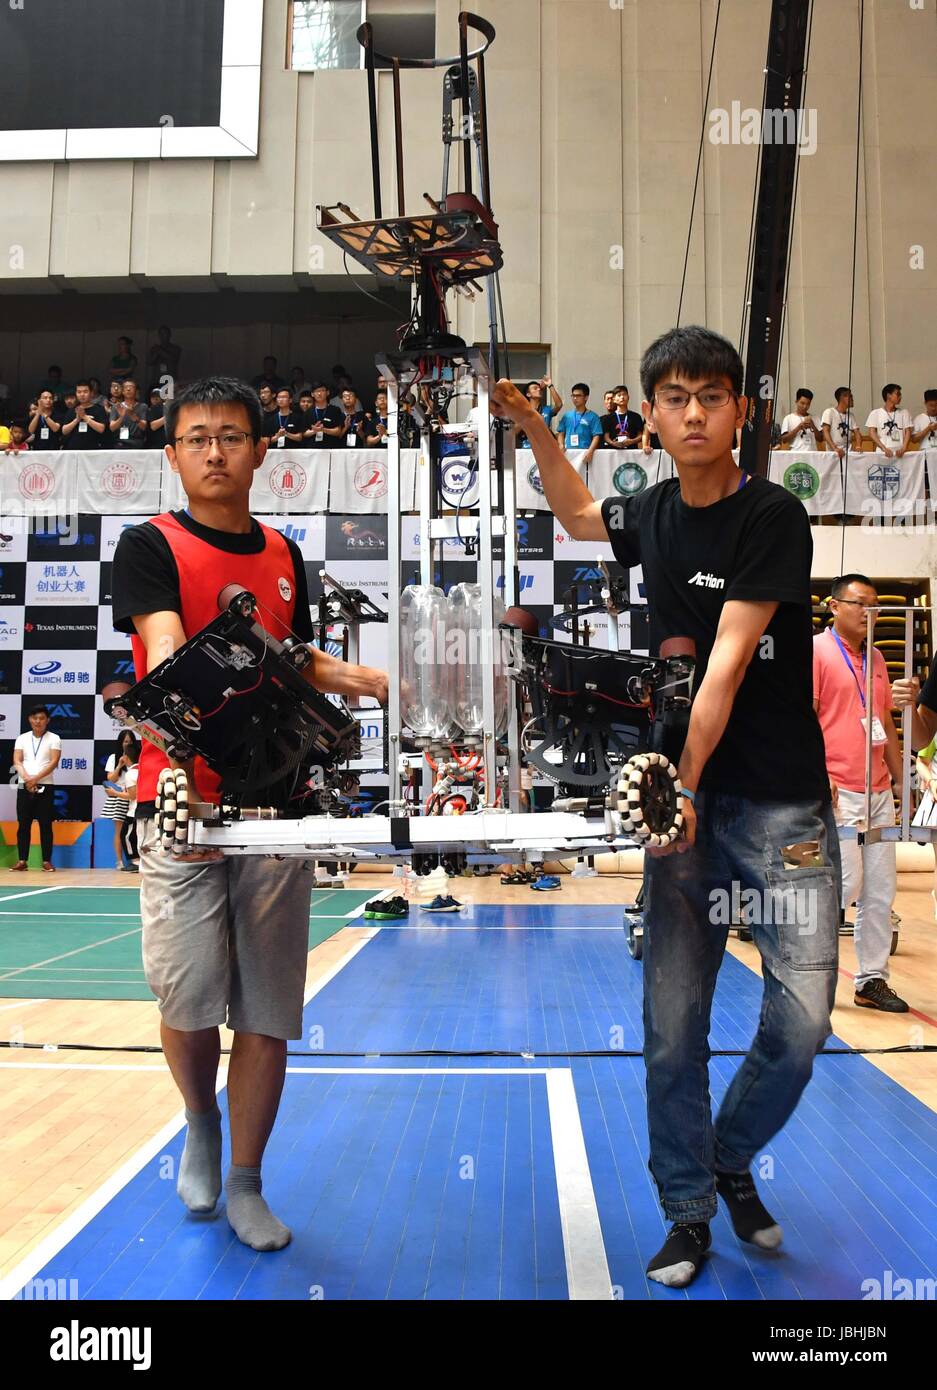 (170611) -- JINAN, June 11, 2017 (Xinhua) -- Contestants of Northeastern University control a robot during the Robocon Finals of the 16th China University Robot Competition in Zoucheng City, east China's Shandong Province, June 11, 2017. Team of Northeastern University took the first prize of the contest.  (Xinhua/Xu Suhui) (wyo) Stock Photo